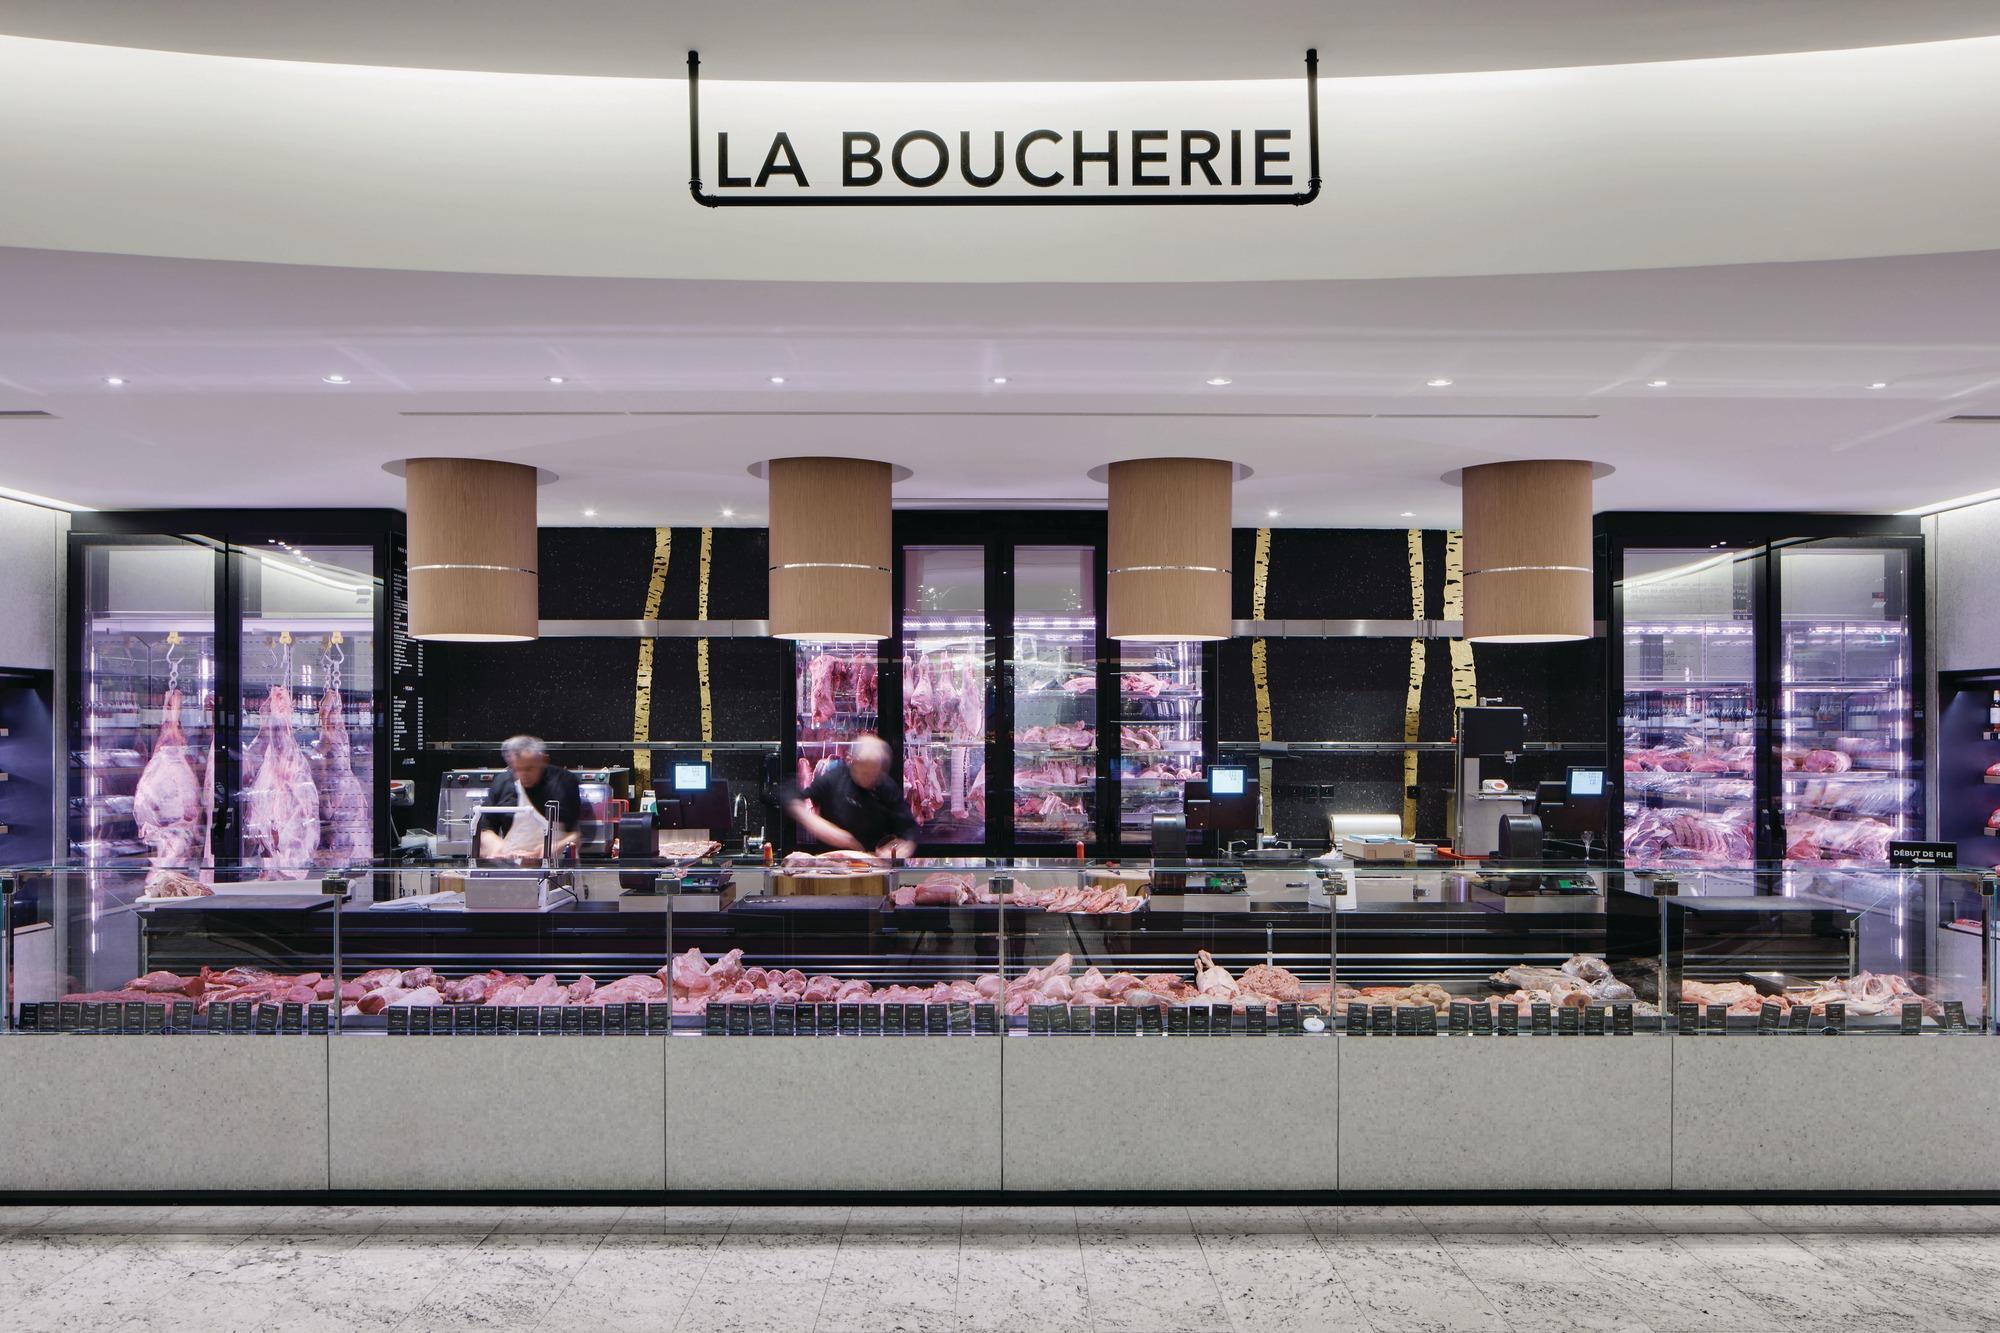 Store gallery: Le Bon Marché gives its food hall a French market theme, Gallery